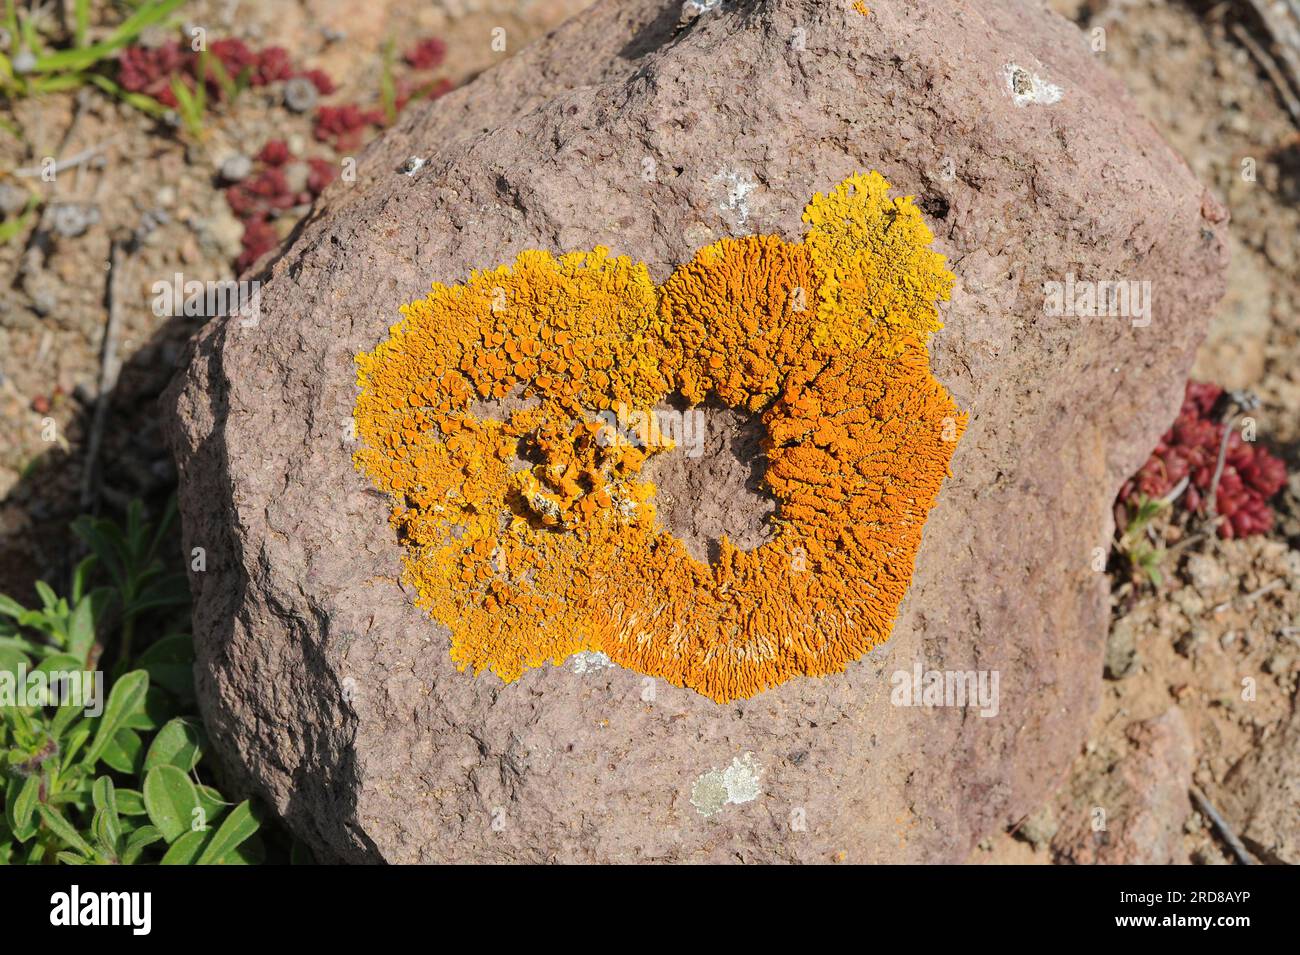 Caloplaca thallincola (right) and Caloplaca flavescens (left) are two species of crustose lichens with orange or yellow thallus. Fungi. Ascomycota. Te Stock Photo